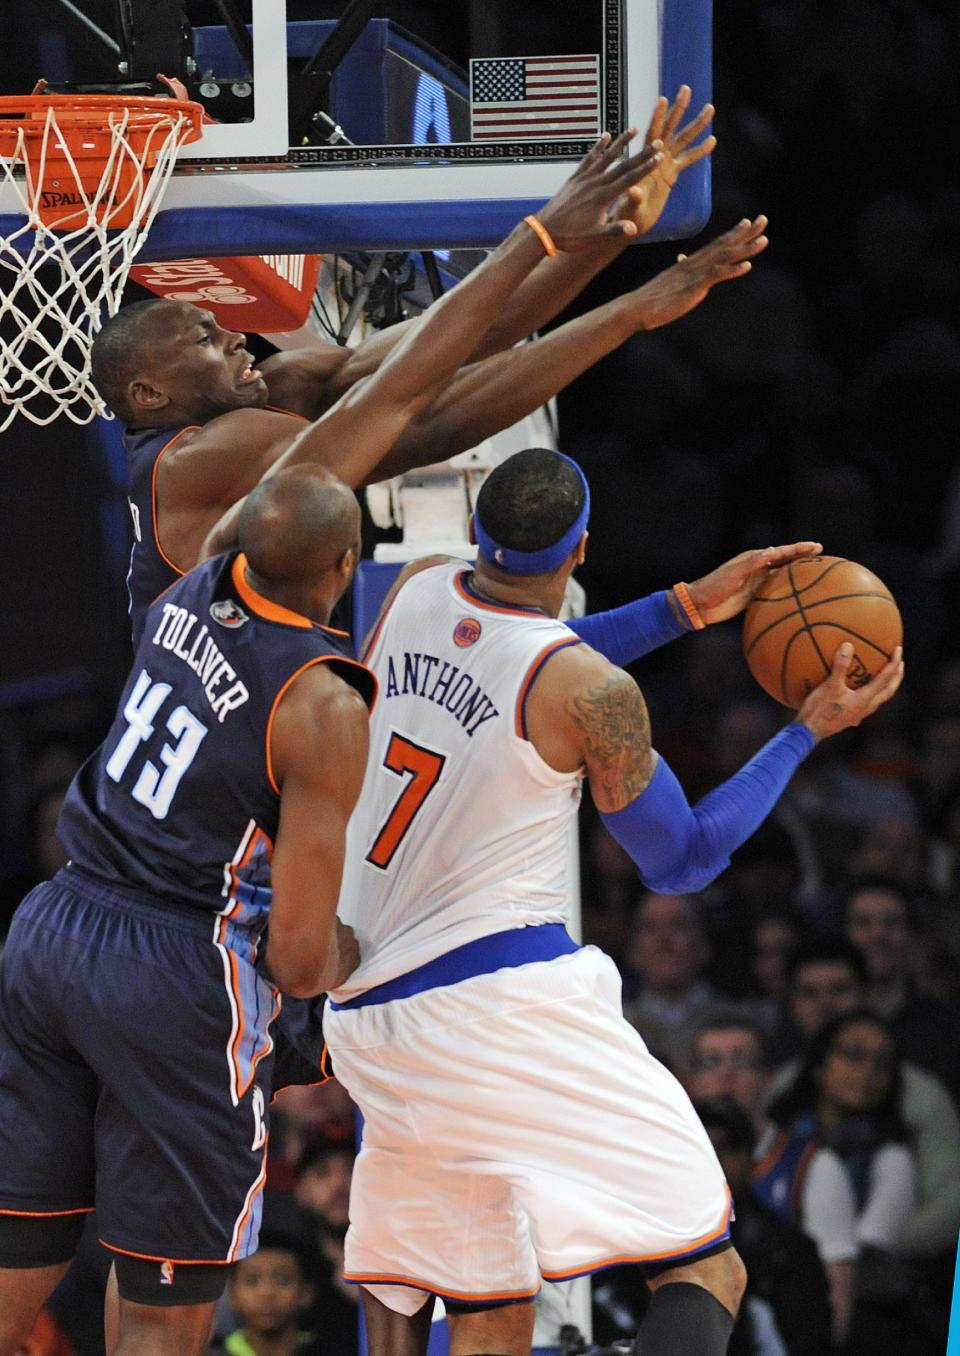 Charlotte Bobcats' Anthony Tolliver (43) and Bismack Biyombo guard New York Knicks' Carmelo Anthony (7) during the fourth quarter of an NBA basketball game, Friday, Jan. 24, 2014, at Madison Square Garden in New York. Anthony scored 62 points as the Knicks defeated the Bobcats 125-96. (AP Photo/Bill Kostroun)